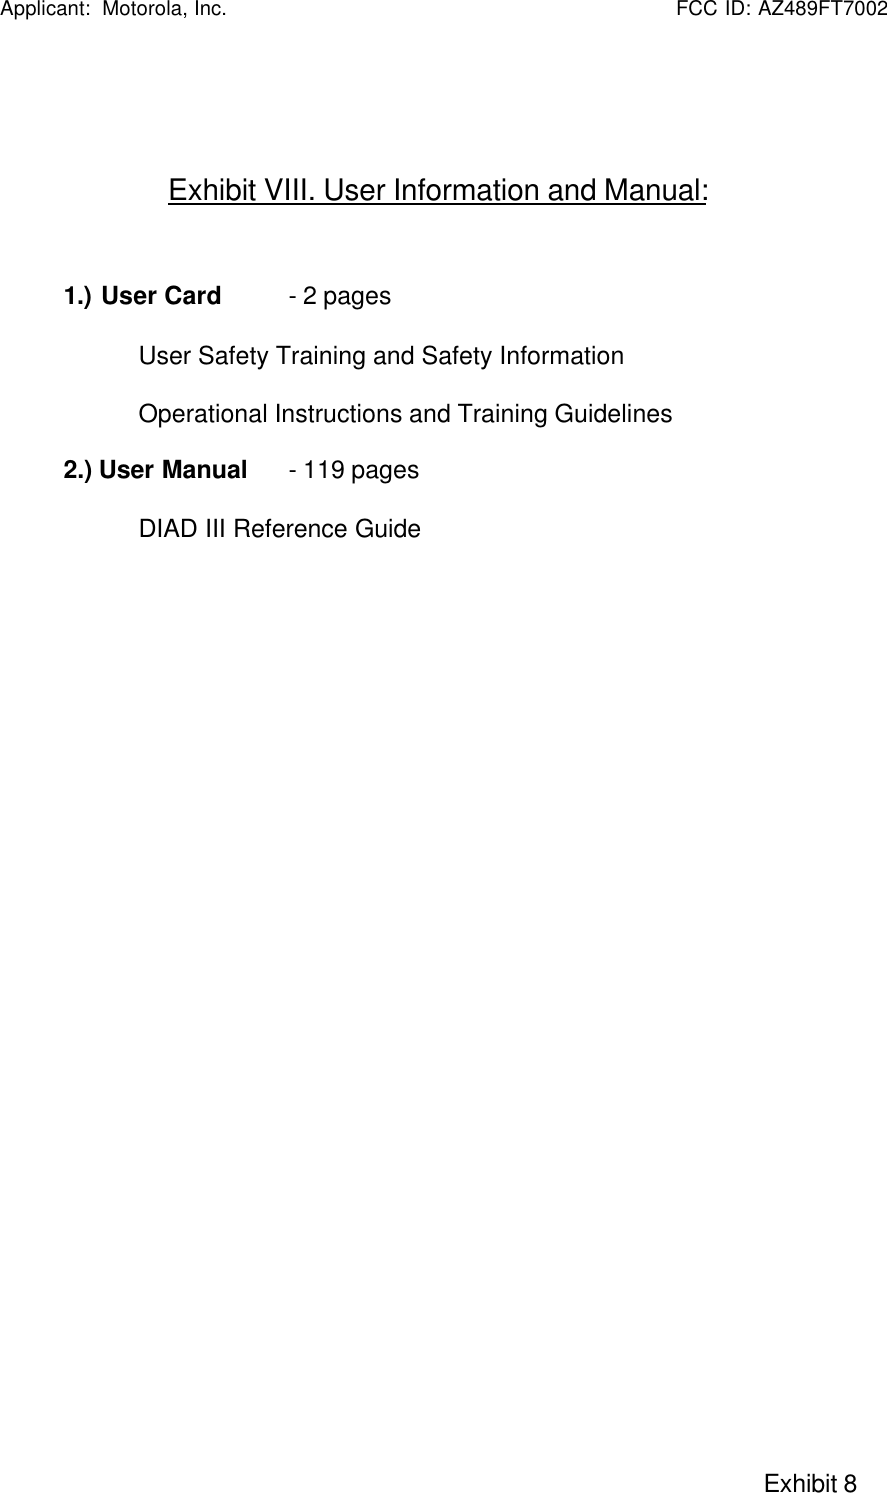   Applicant:  Motorola, Inc.                                                      FCC ID: AZ489FT7002                                                                                                                                                     Exhibit 8Exhibit VIII. User Information and Manual:1.) User Card  - 2 pagesUser Safety Training and Safety InformationOperational Instructions and Training Guidelines2.) User Manual   - 119 pagesDIAD III Reference Guide